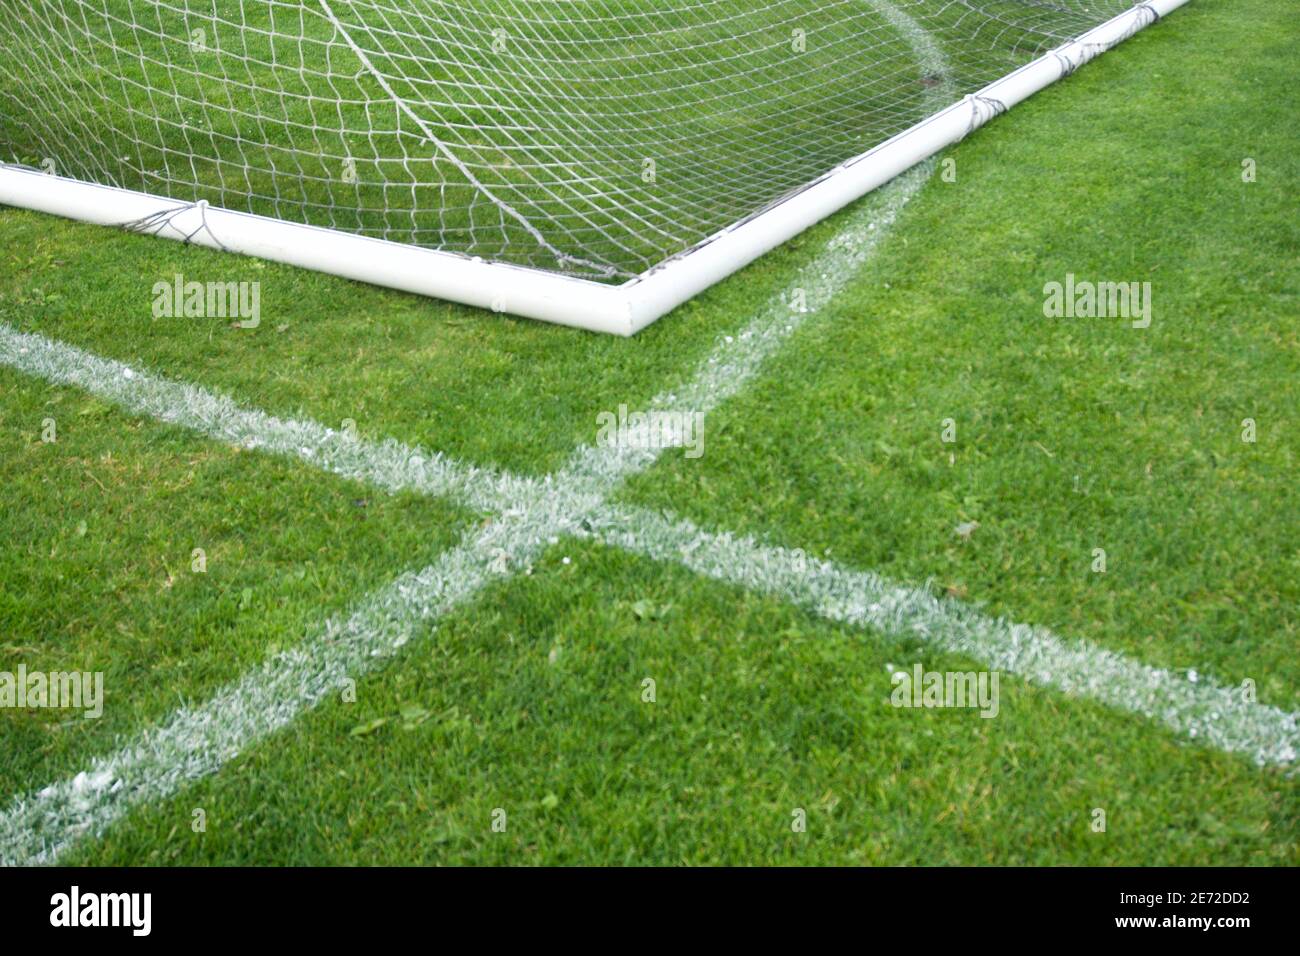 Green grass painted with a white 'x' lawn paint for goal and game boundary markings, with white soccer goal frame, twine mesh, and tubing. Stock Photo